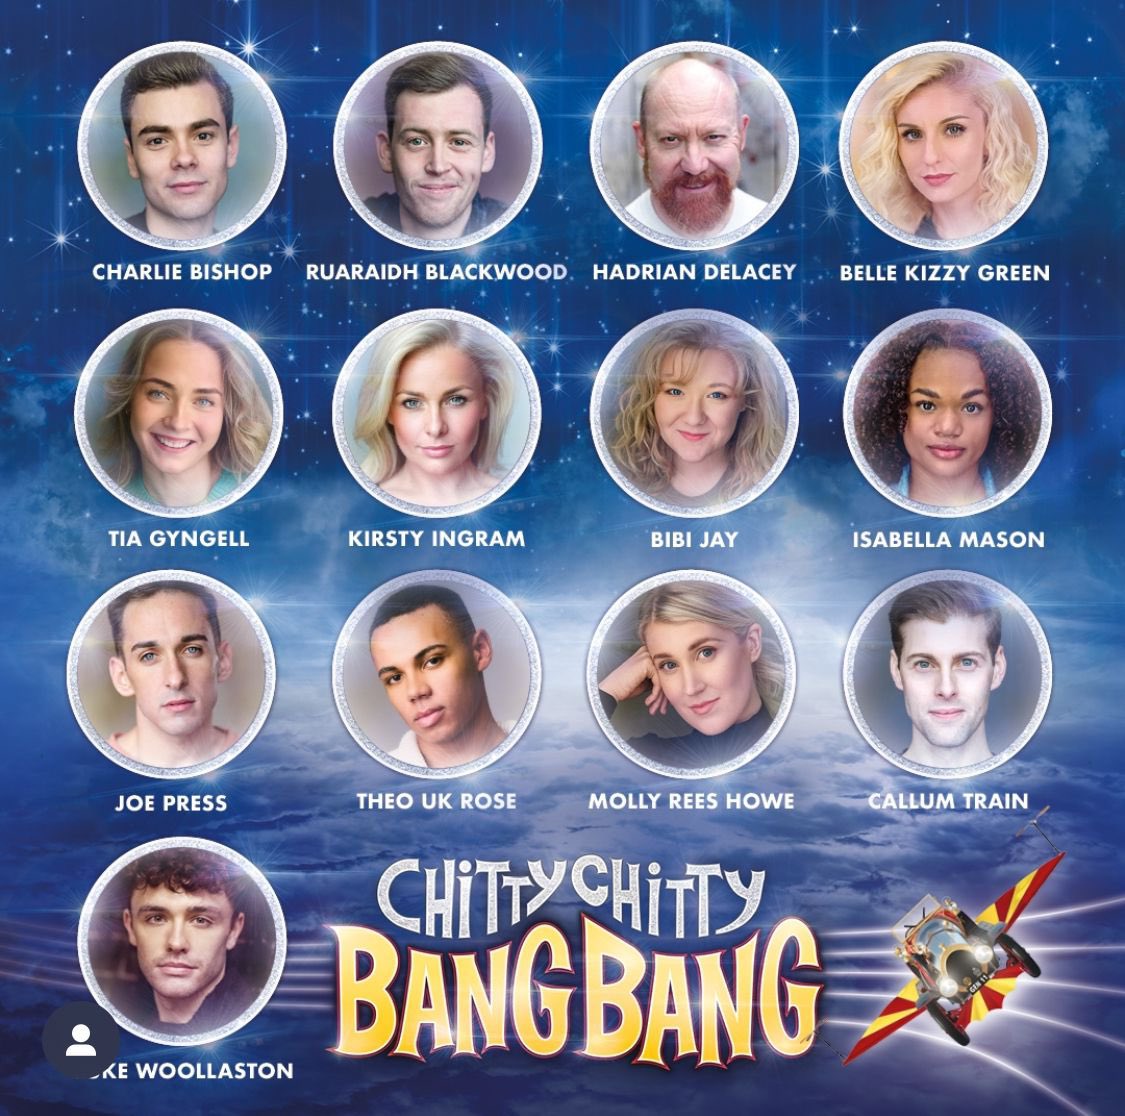 Cast announcement for @ChittyOnTour! 📣✨ Ellie Nunn (@Ellienunn) will star as Truly Scrumptious and she is joined in the cast by Hadrian Delaney (@delacey68). Casting by @dobcasting Touring from 30th April #chittychittybangbang #trulyscrumptious #uktour